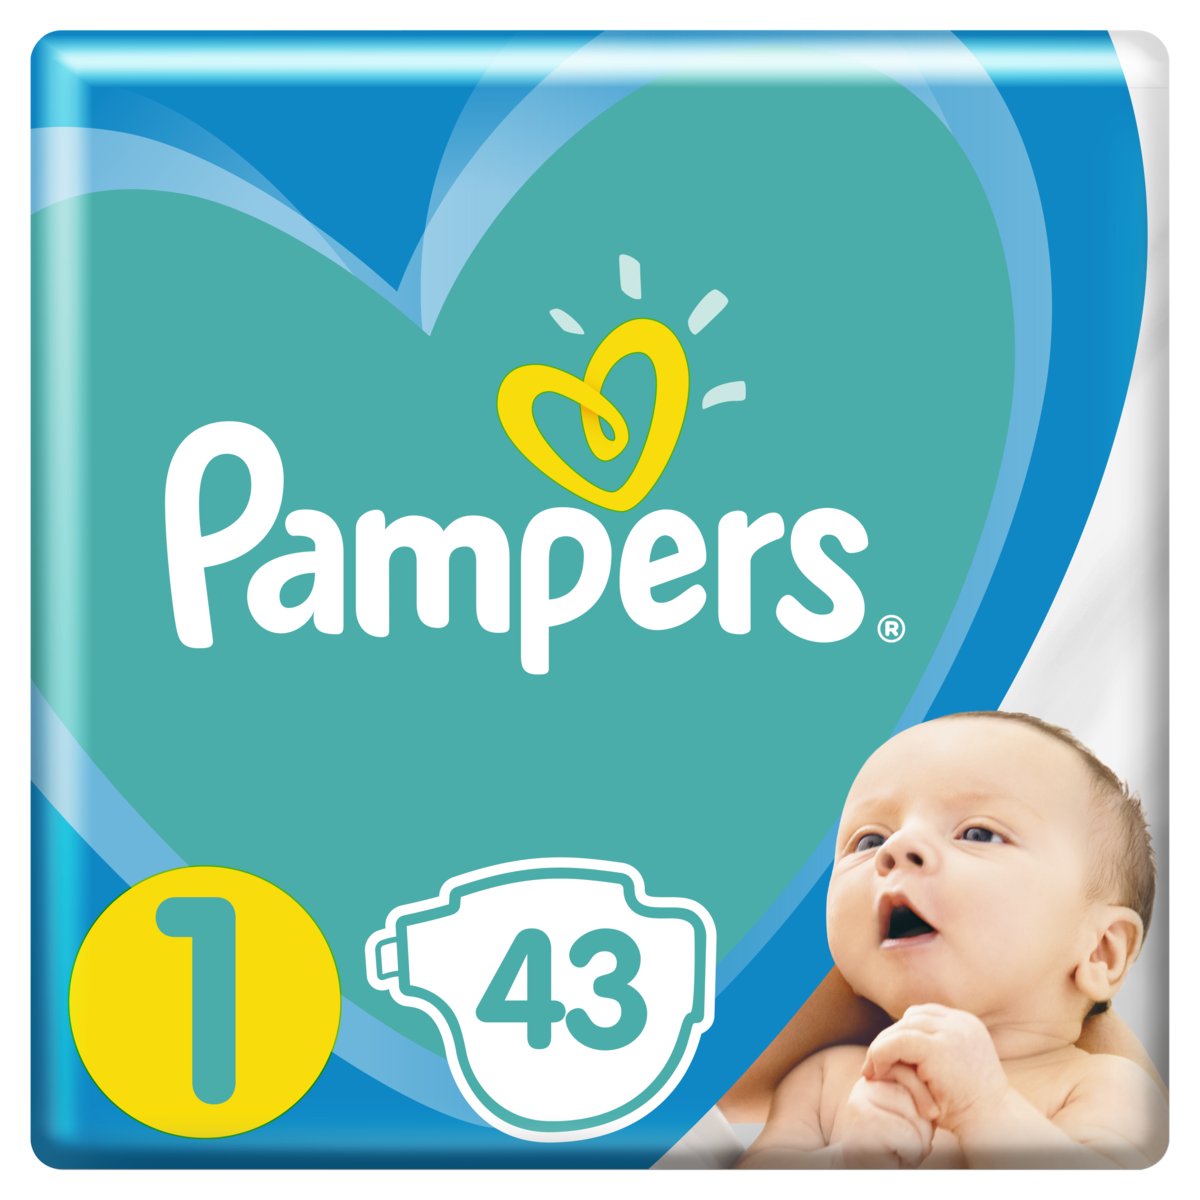 pampers premium care hebe